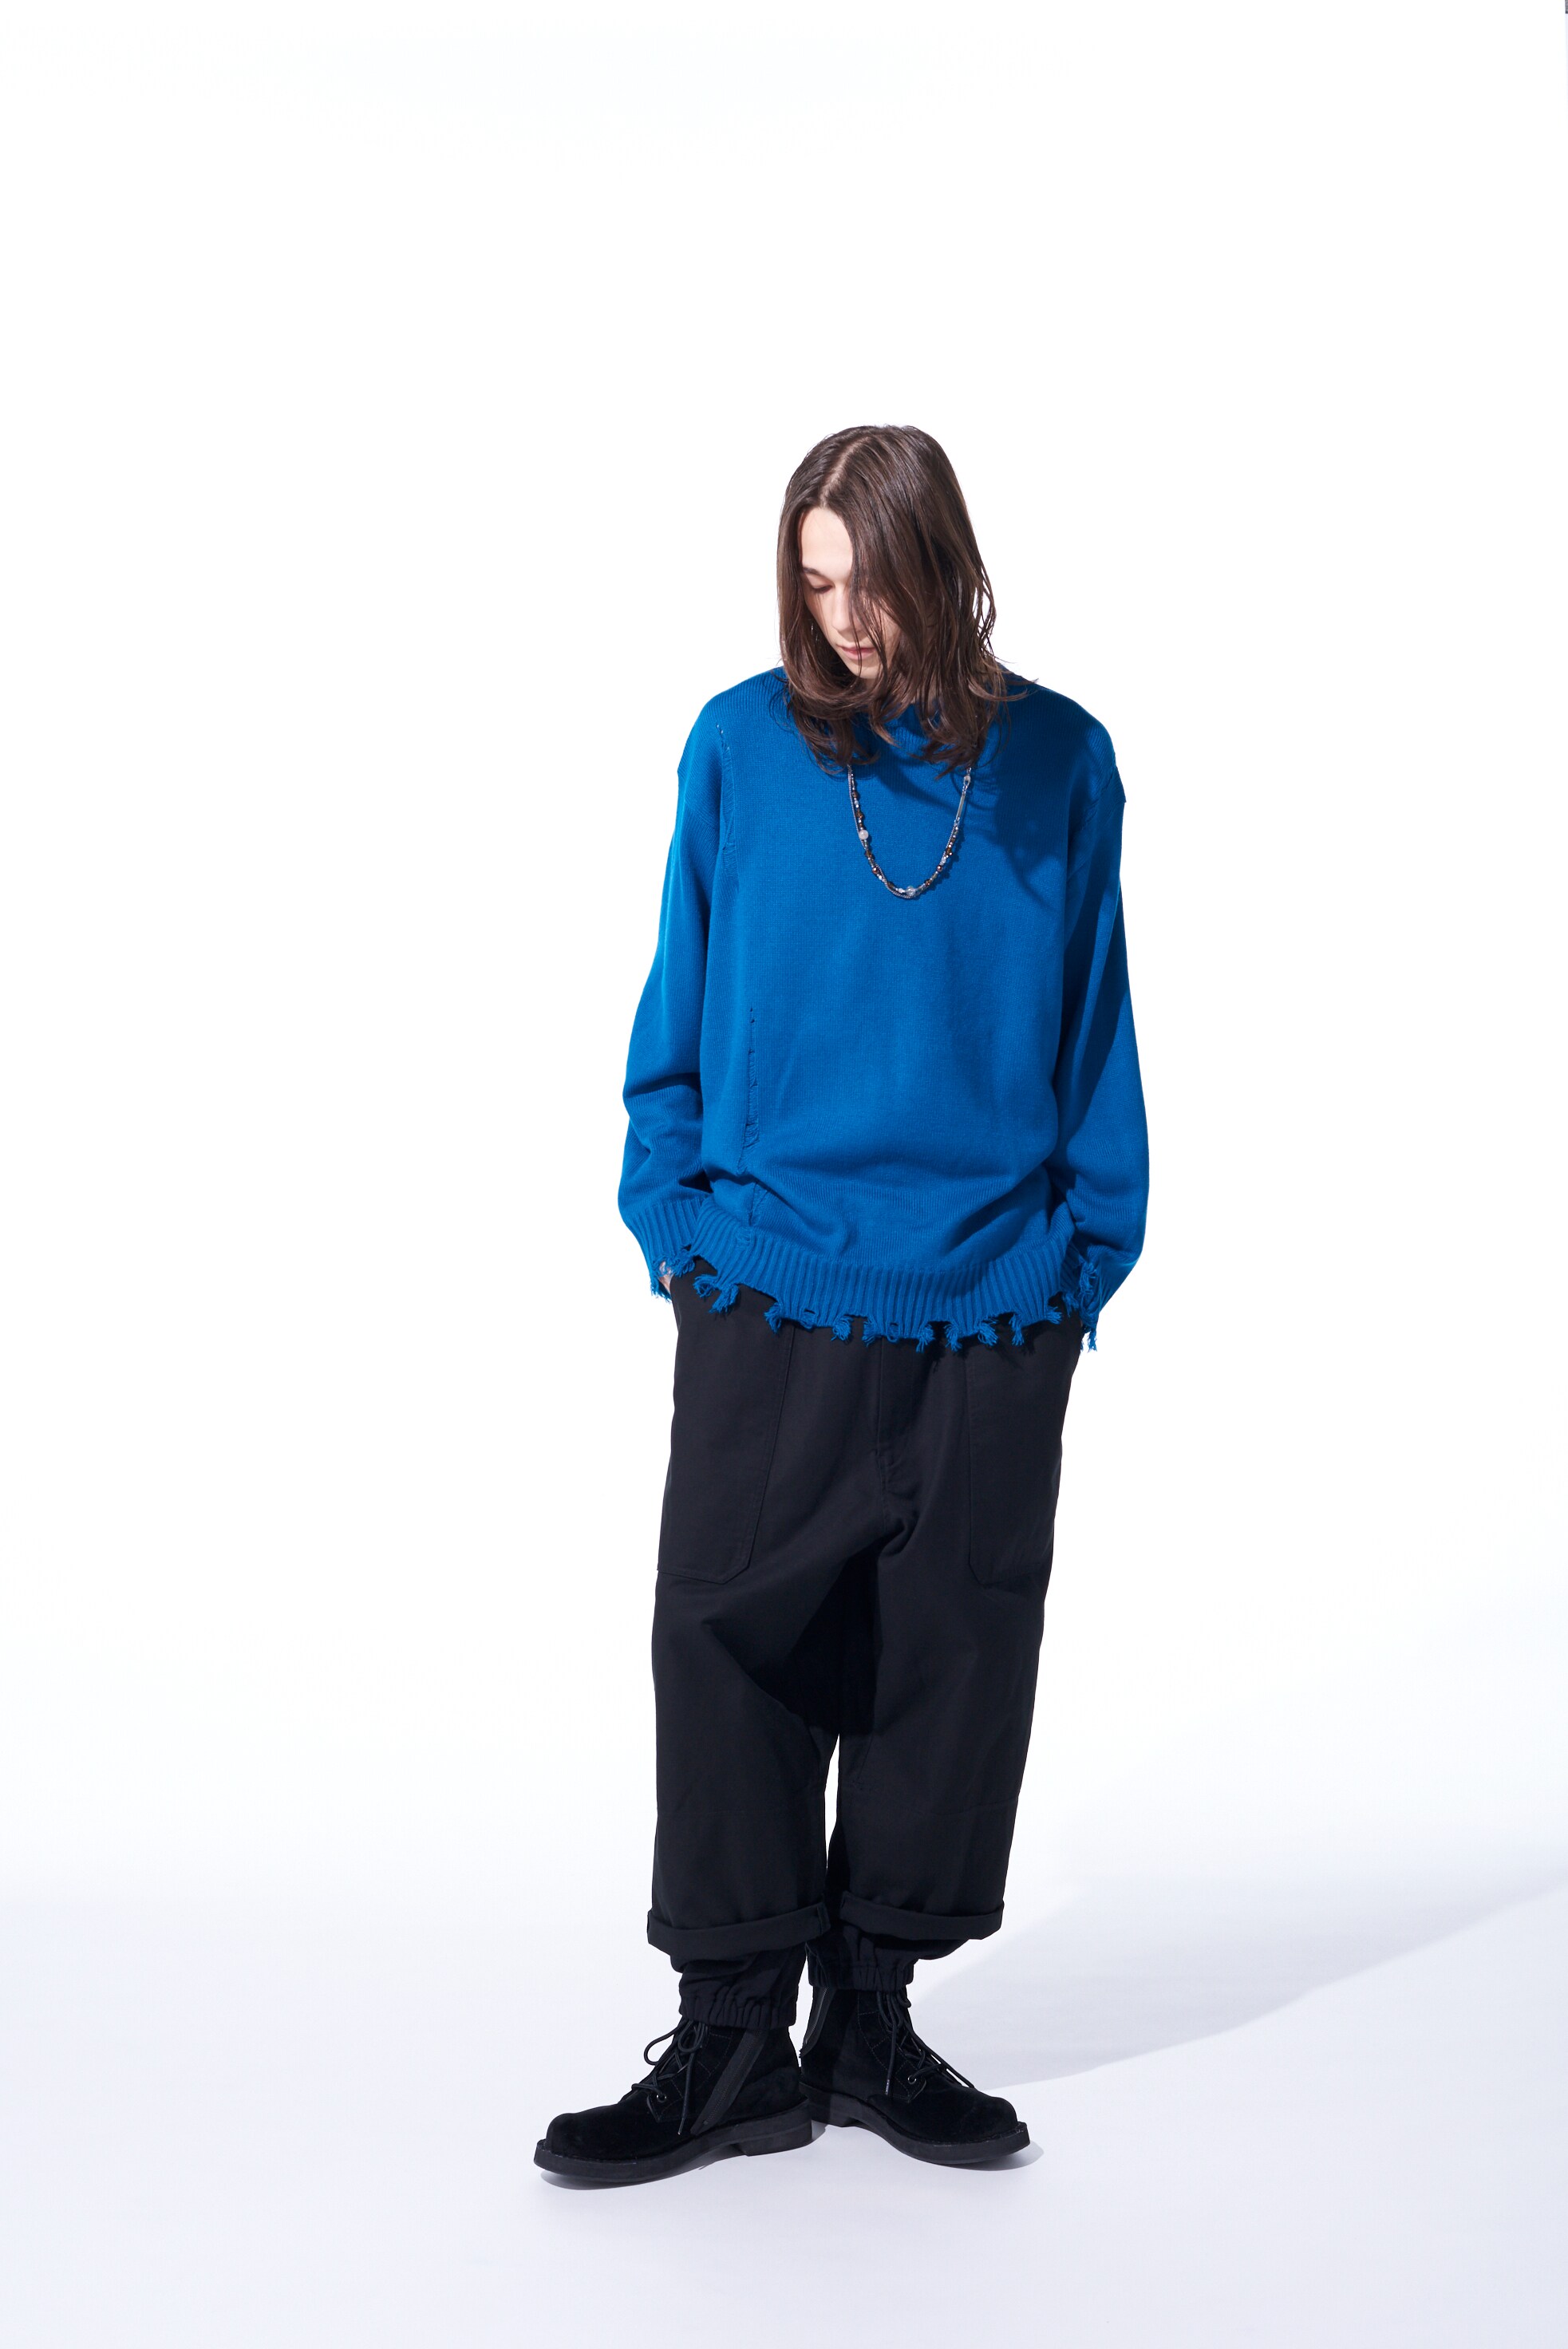 7G BULKY WOOL DAMAGE ROUND NECK PULLOVER(M Marine blue): S'YTE